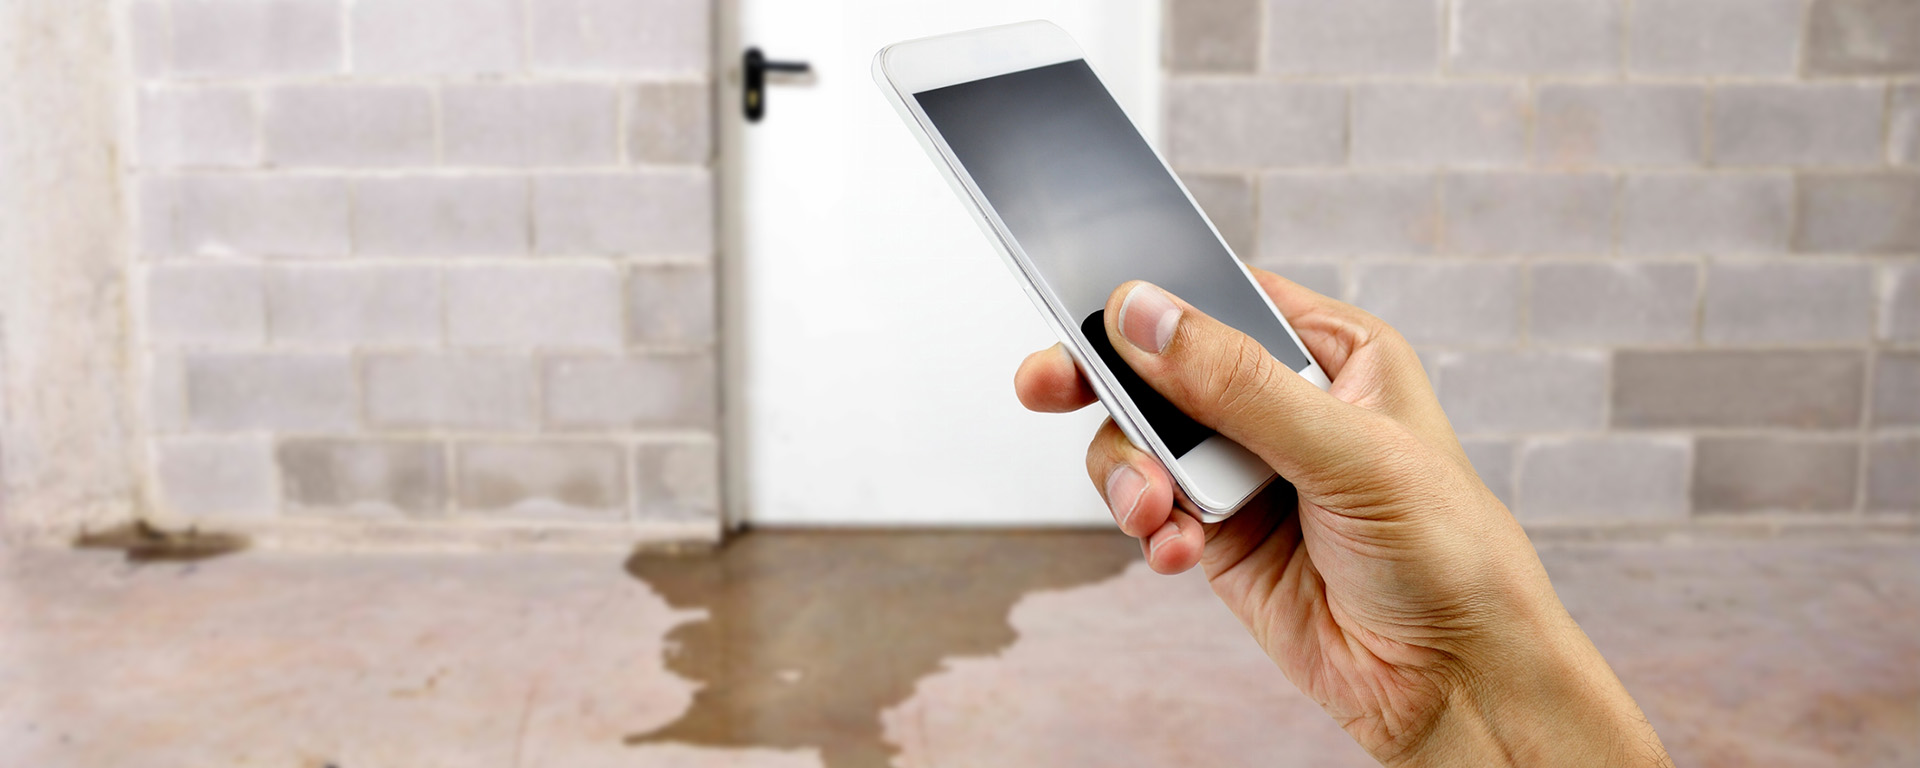 A hand holding up a smart phone with water damage in basement caused by sewer backflow due to clogged sanitary drain. 